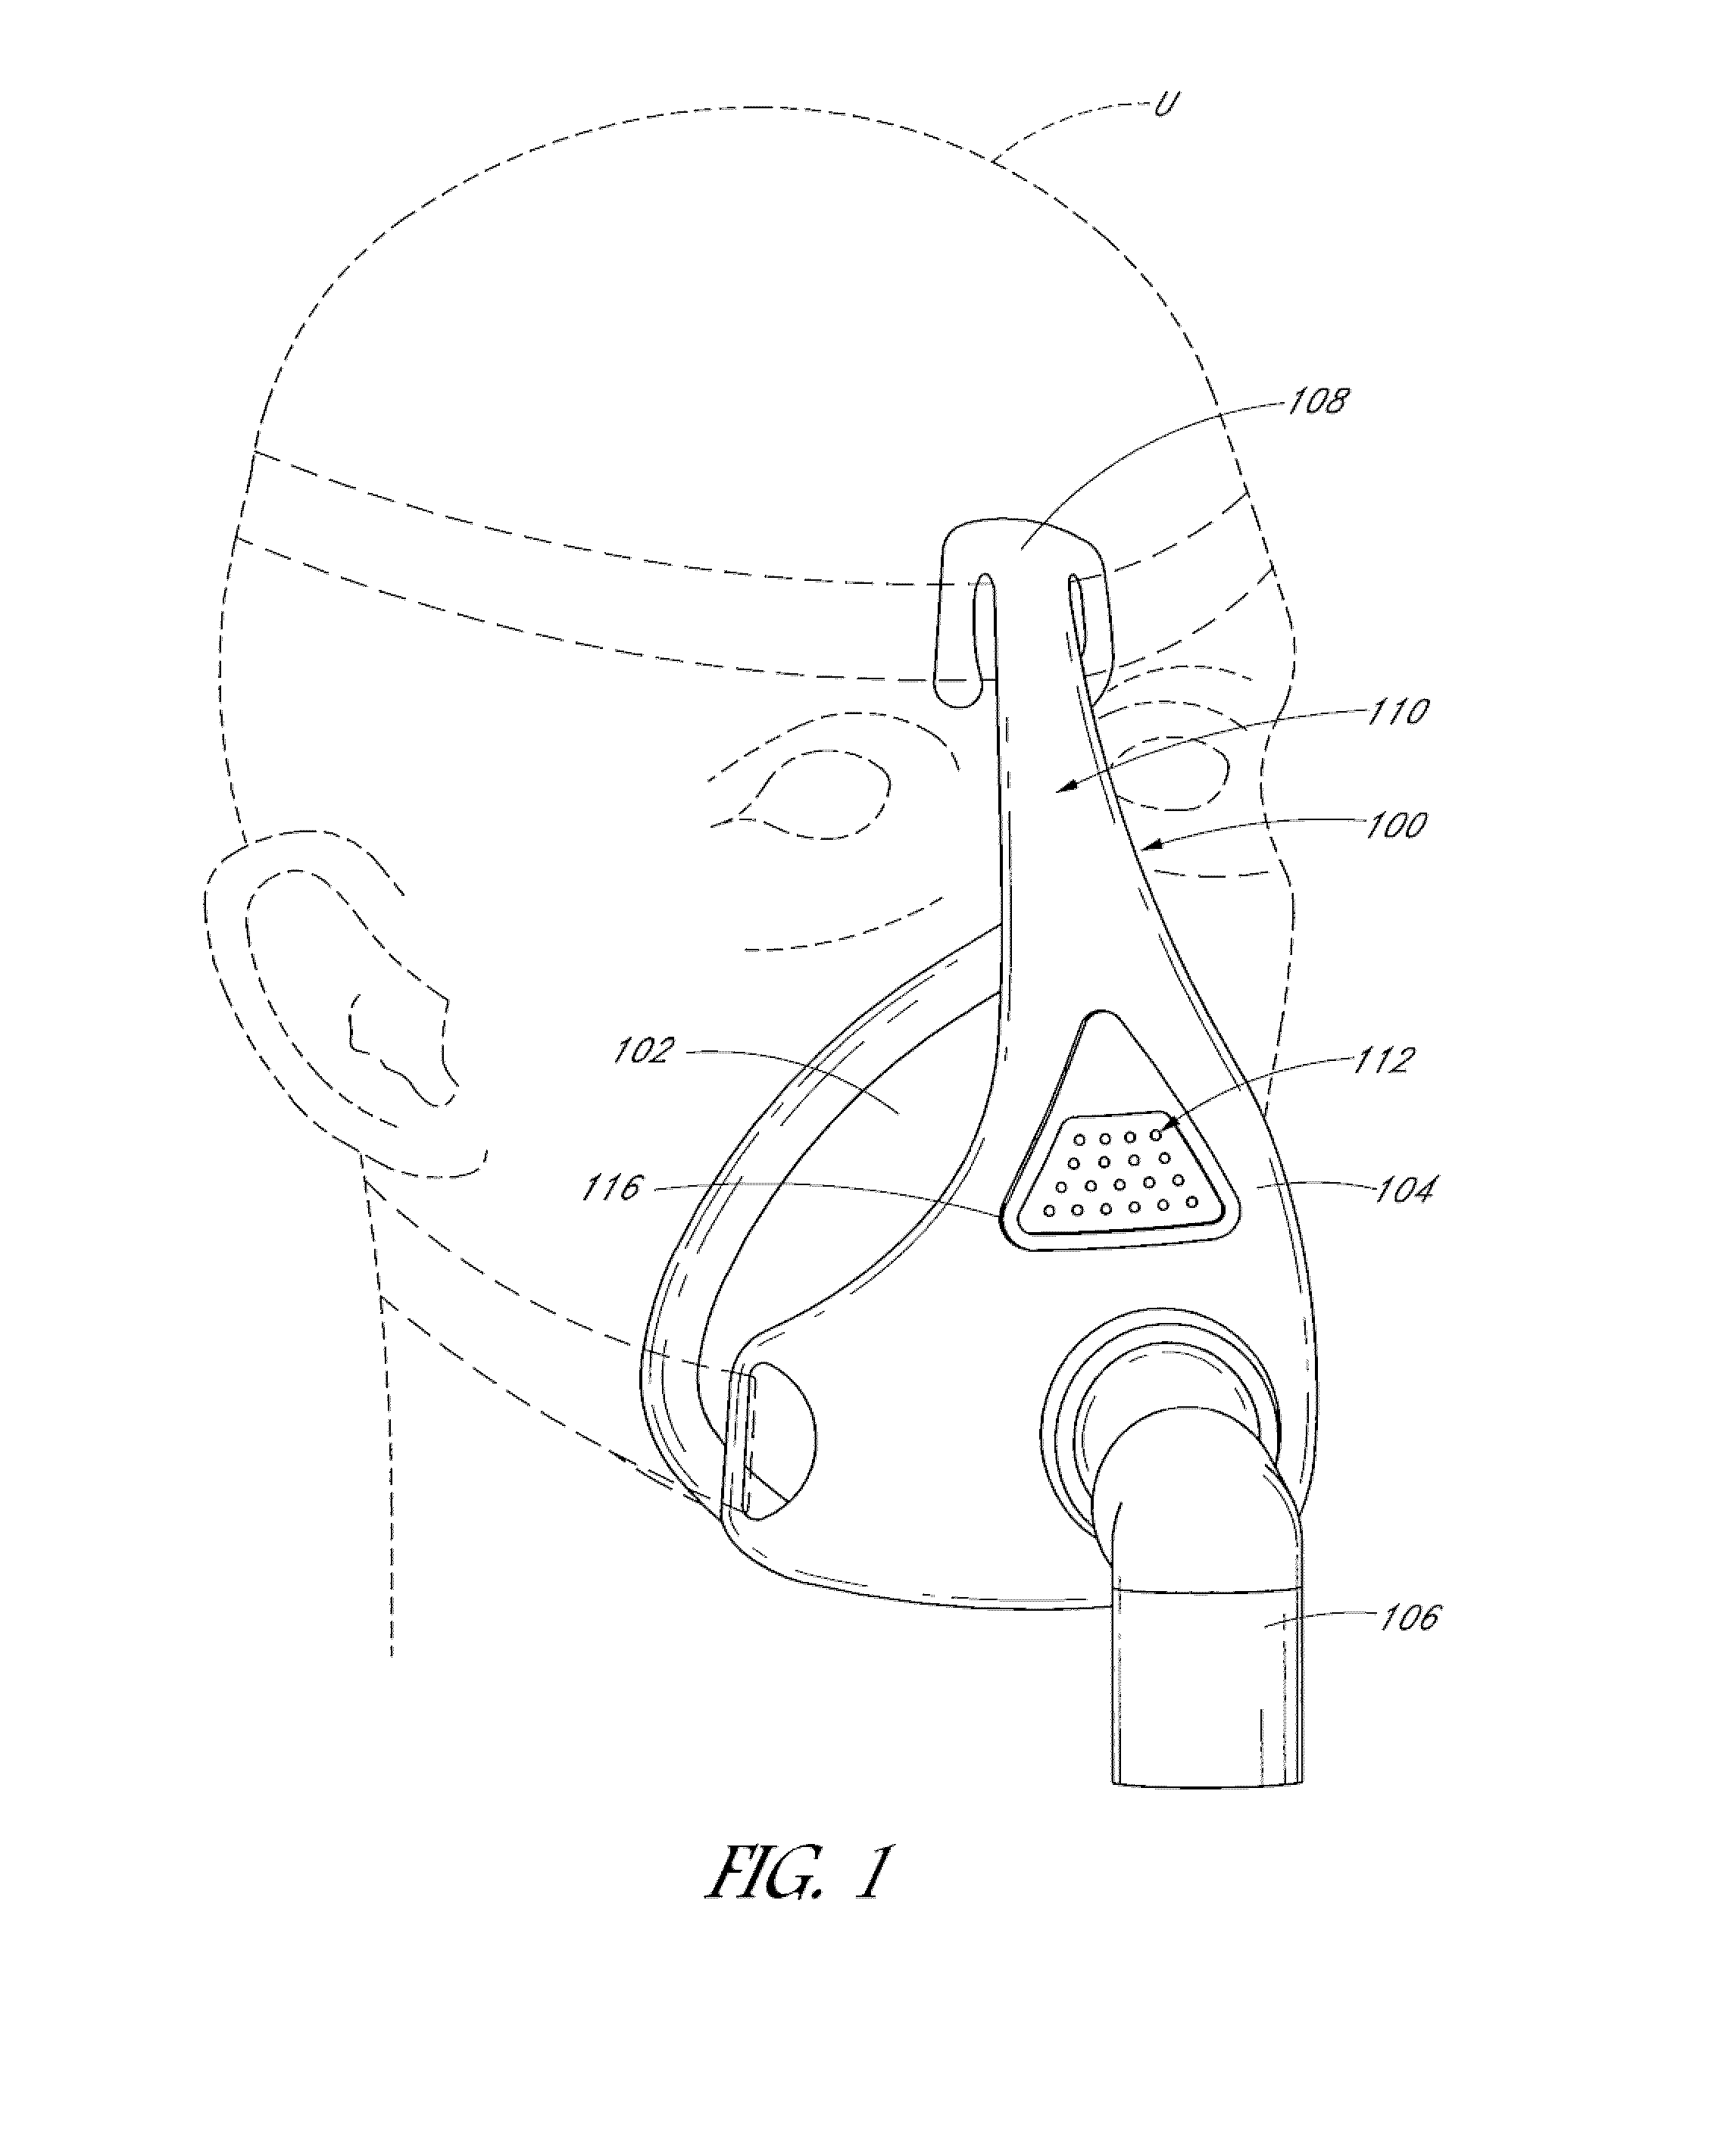 Patient interface with venting